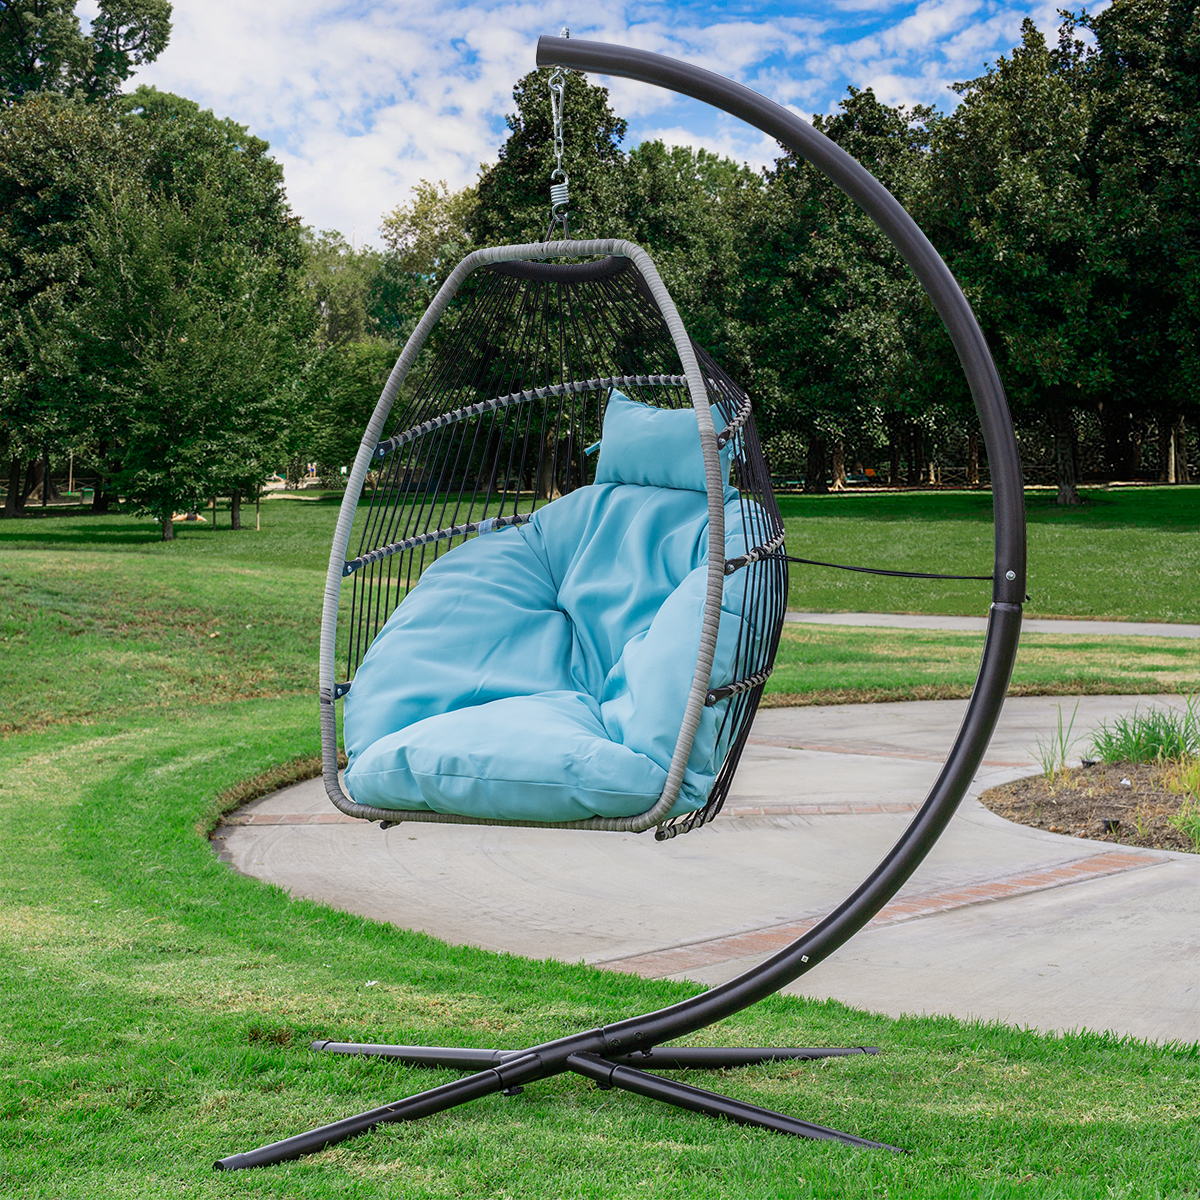 Outdoor Patio Egg Chair Hanging Lounge Chair Swing Chair Basket Style Chair Nest with Cushion and Stand - image 1 of 6